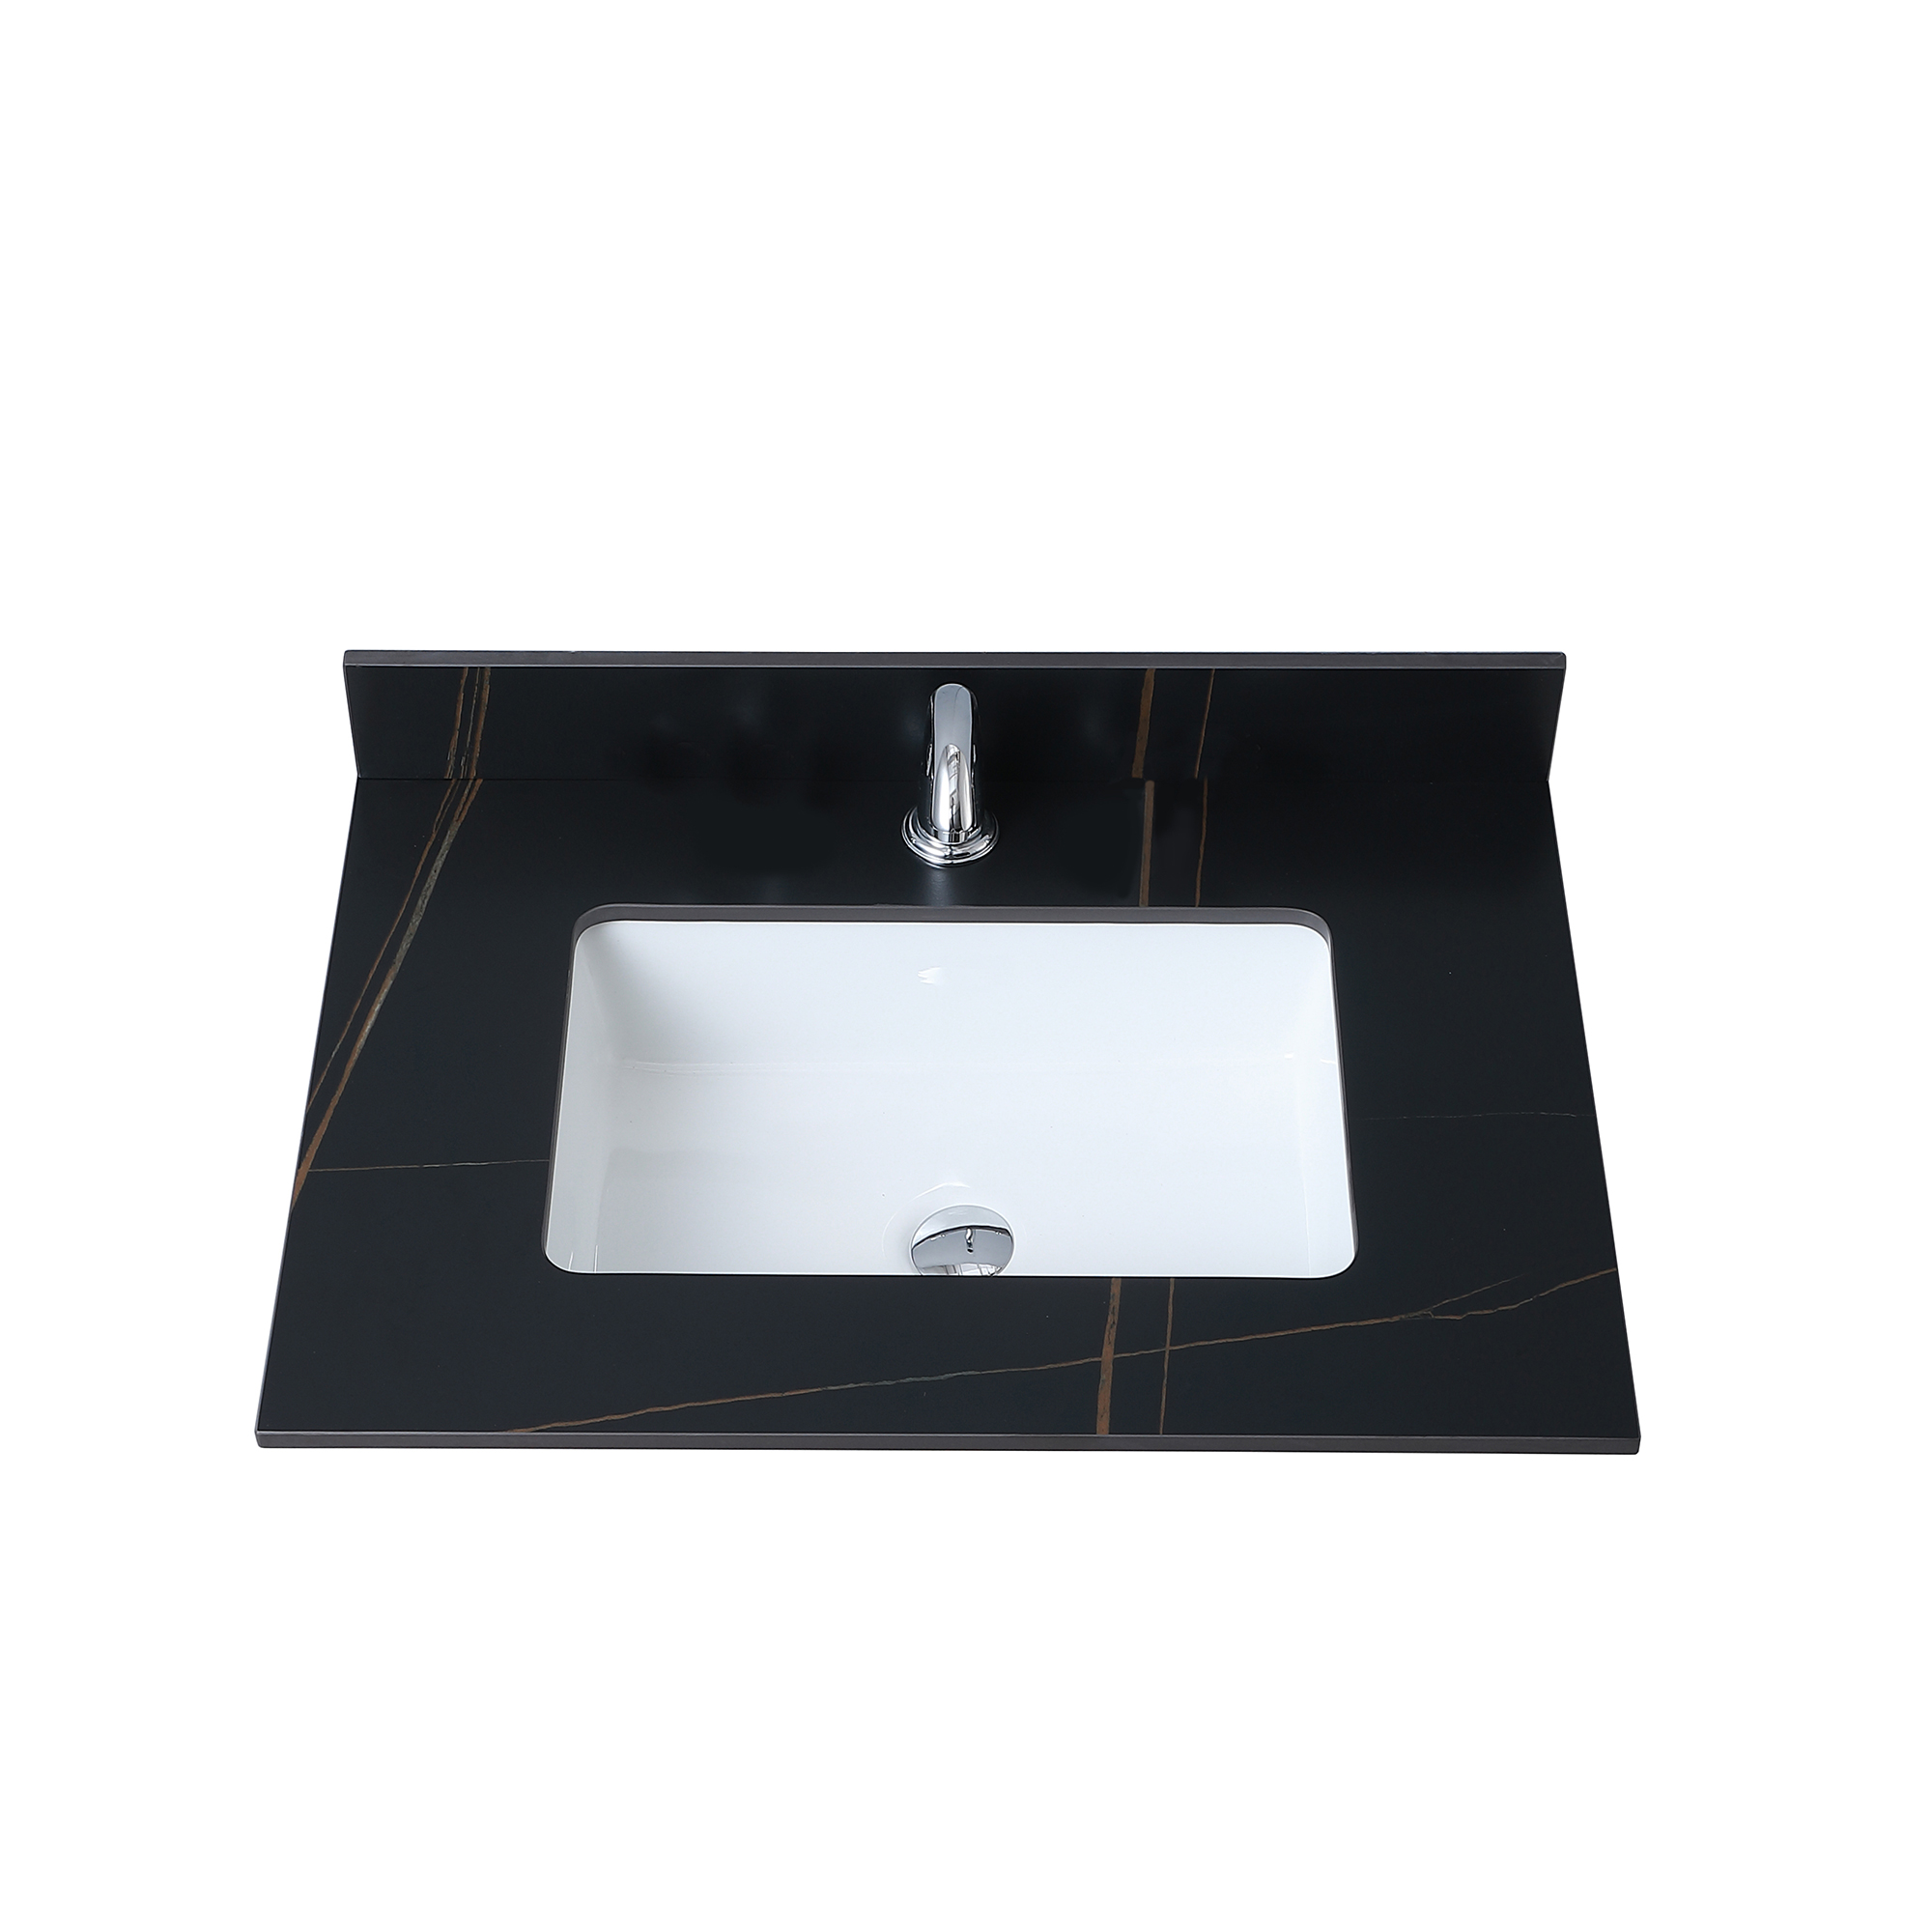 Montary 31" Sintered Stone Bathroom Vanity Top in Black Gold Color with Undermount Ceramic Sink and Single Faucet Hole with Backsplash